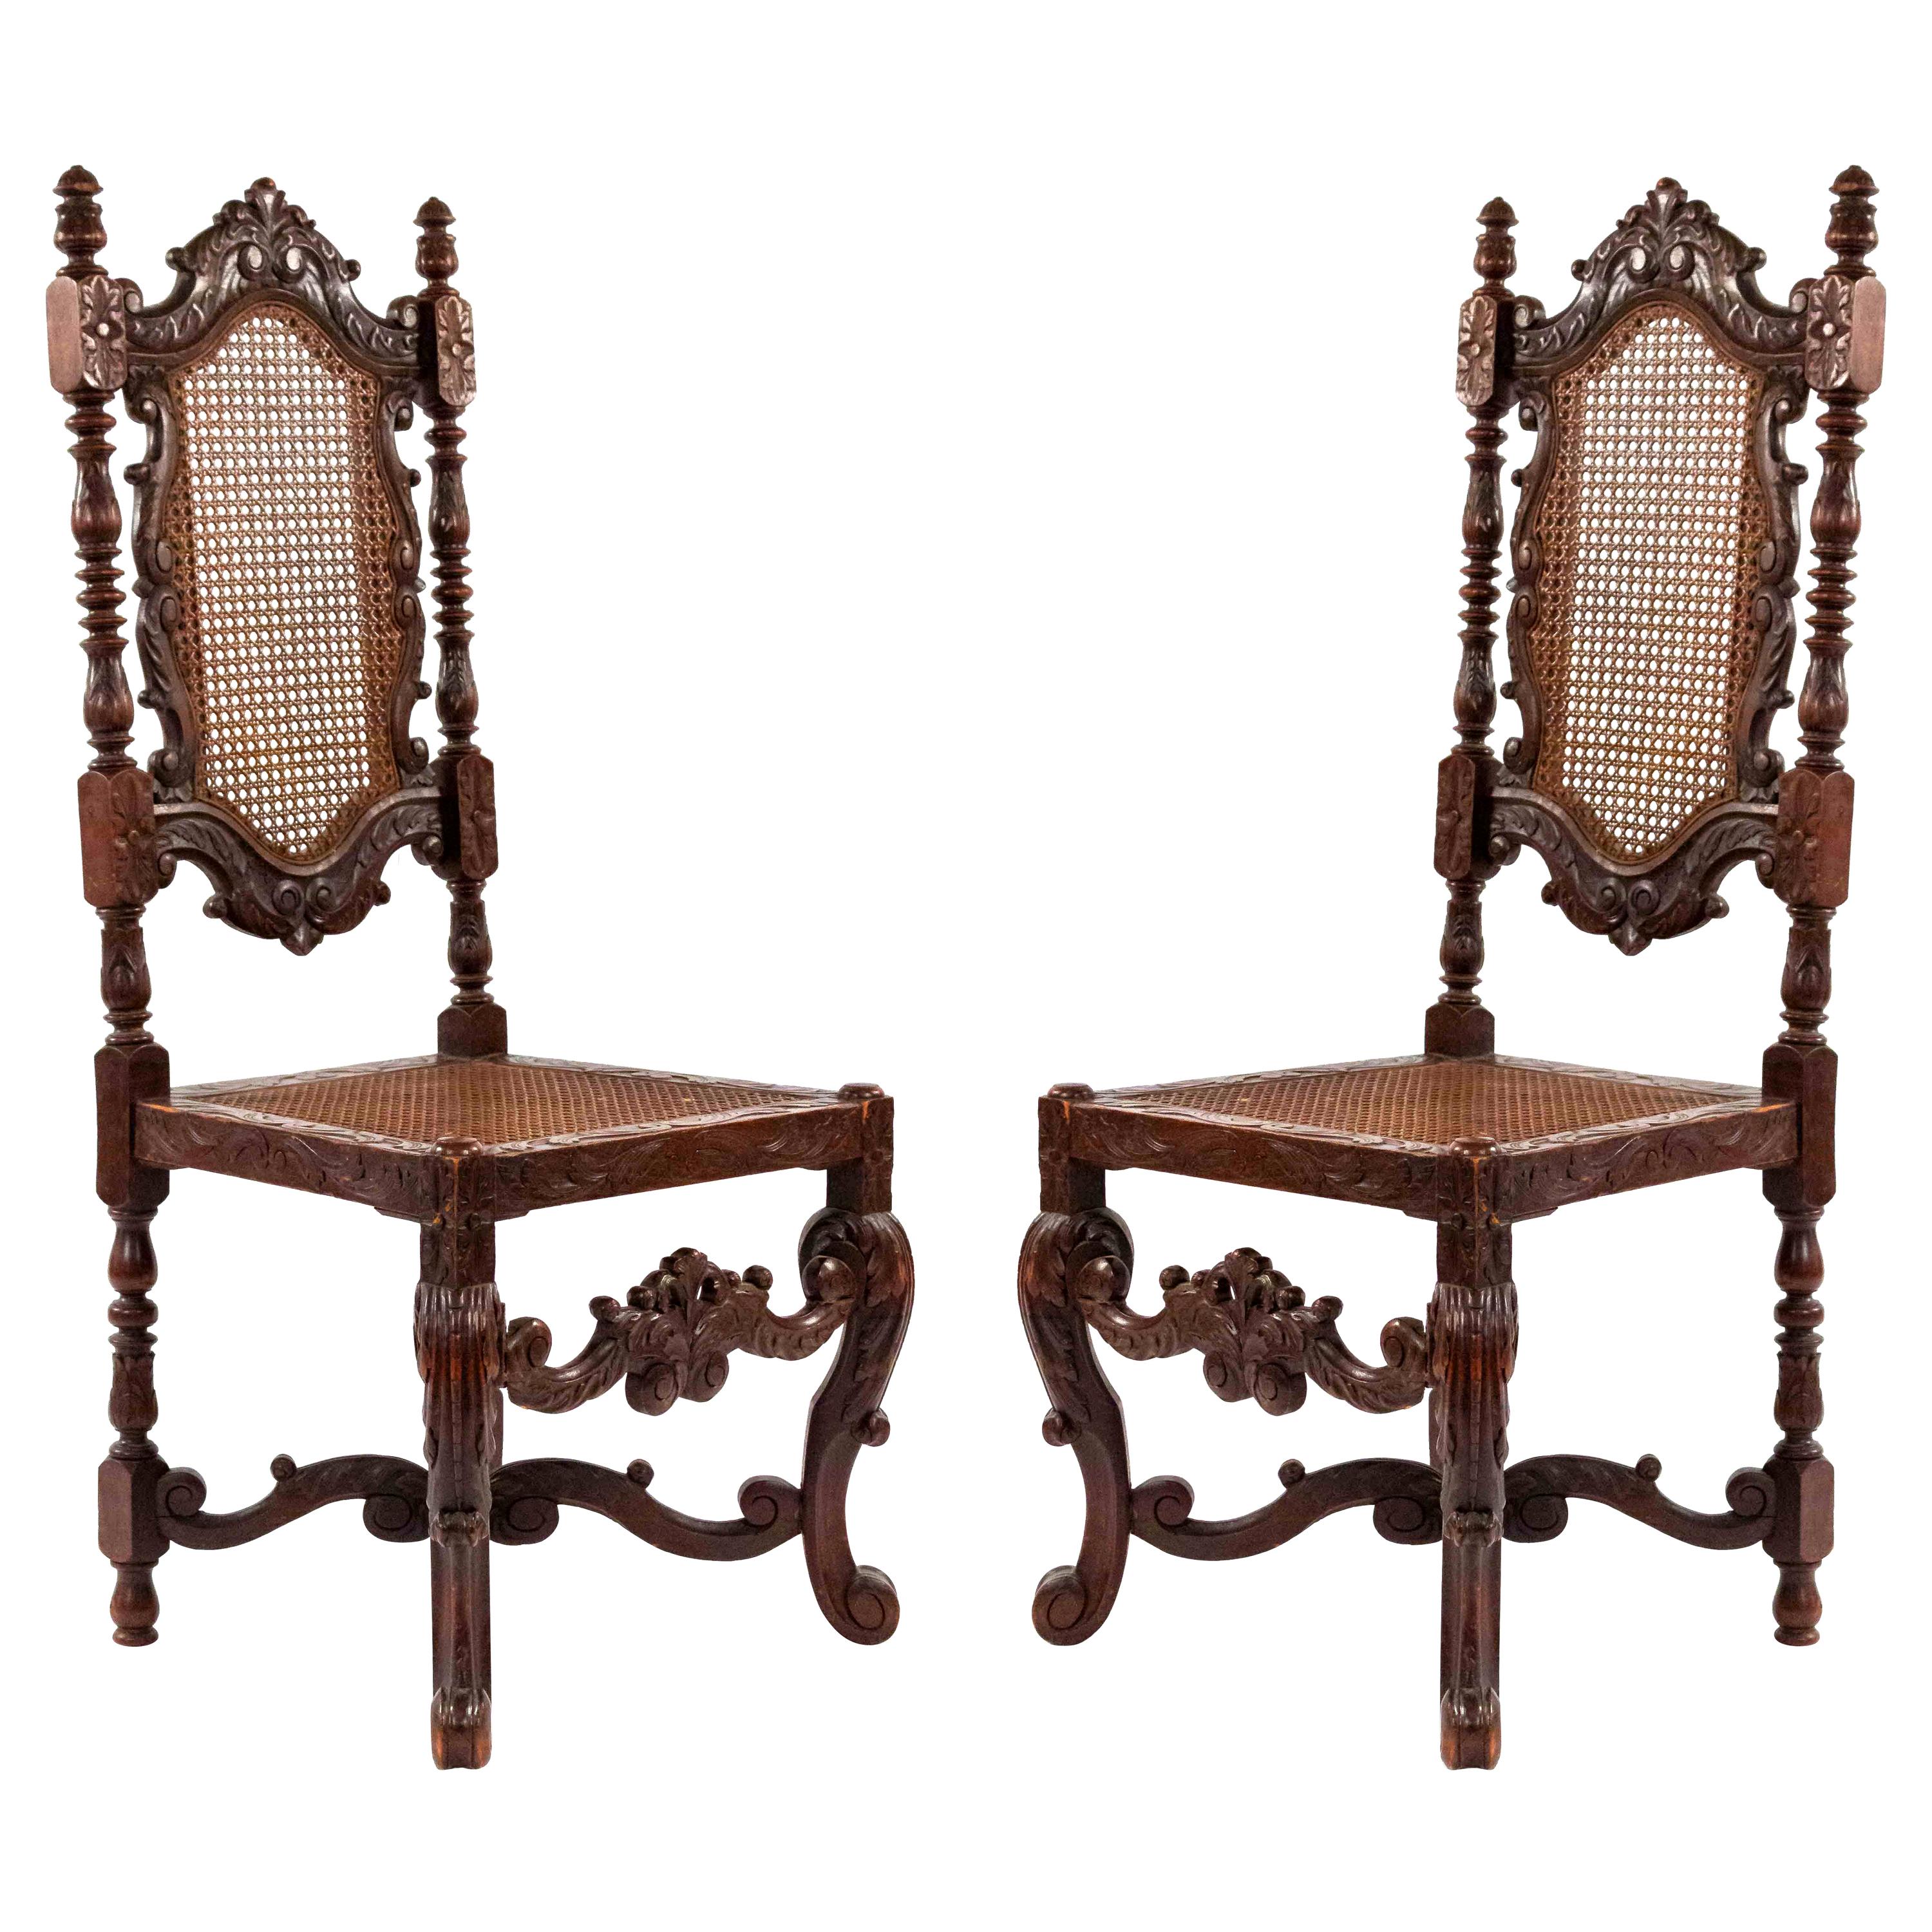 What is Jacobean style furniture?